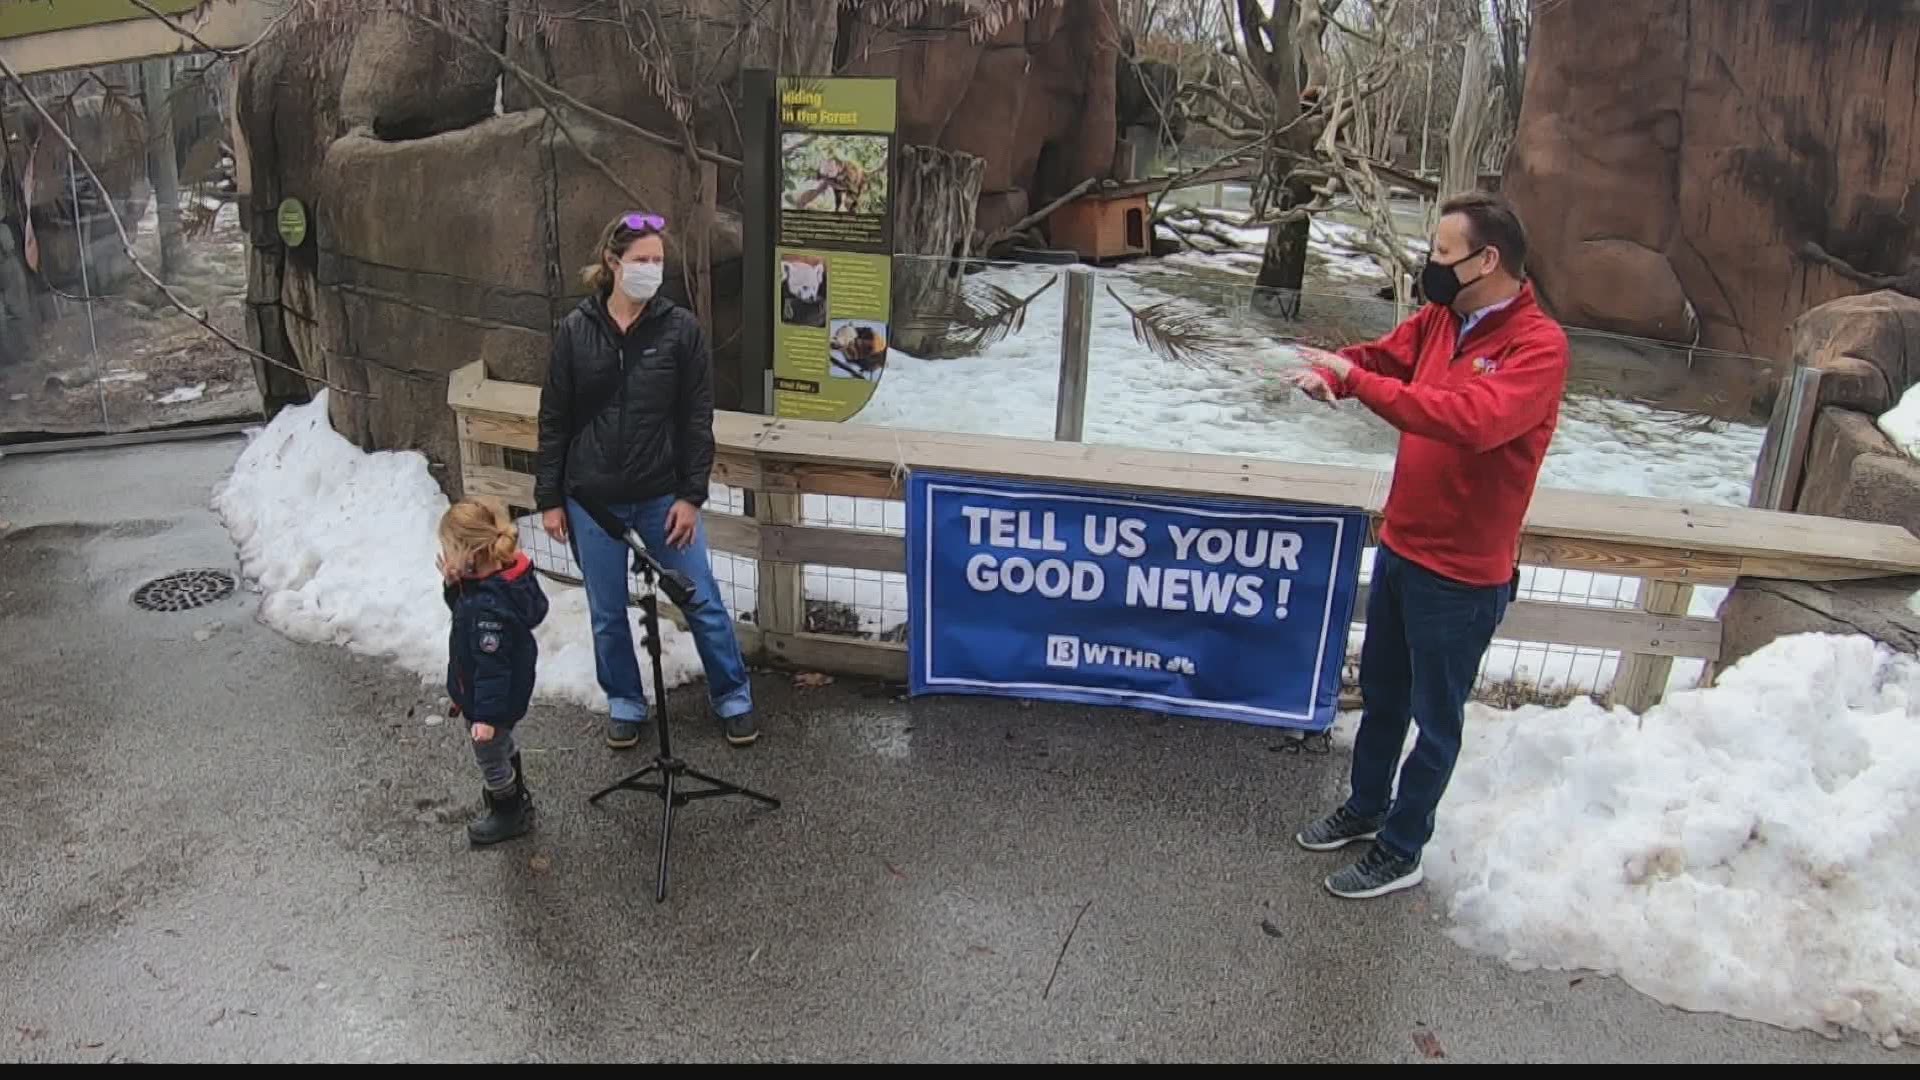 Dave Calabro returned to the Indianapolis Zoo in search of positive stories.